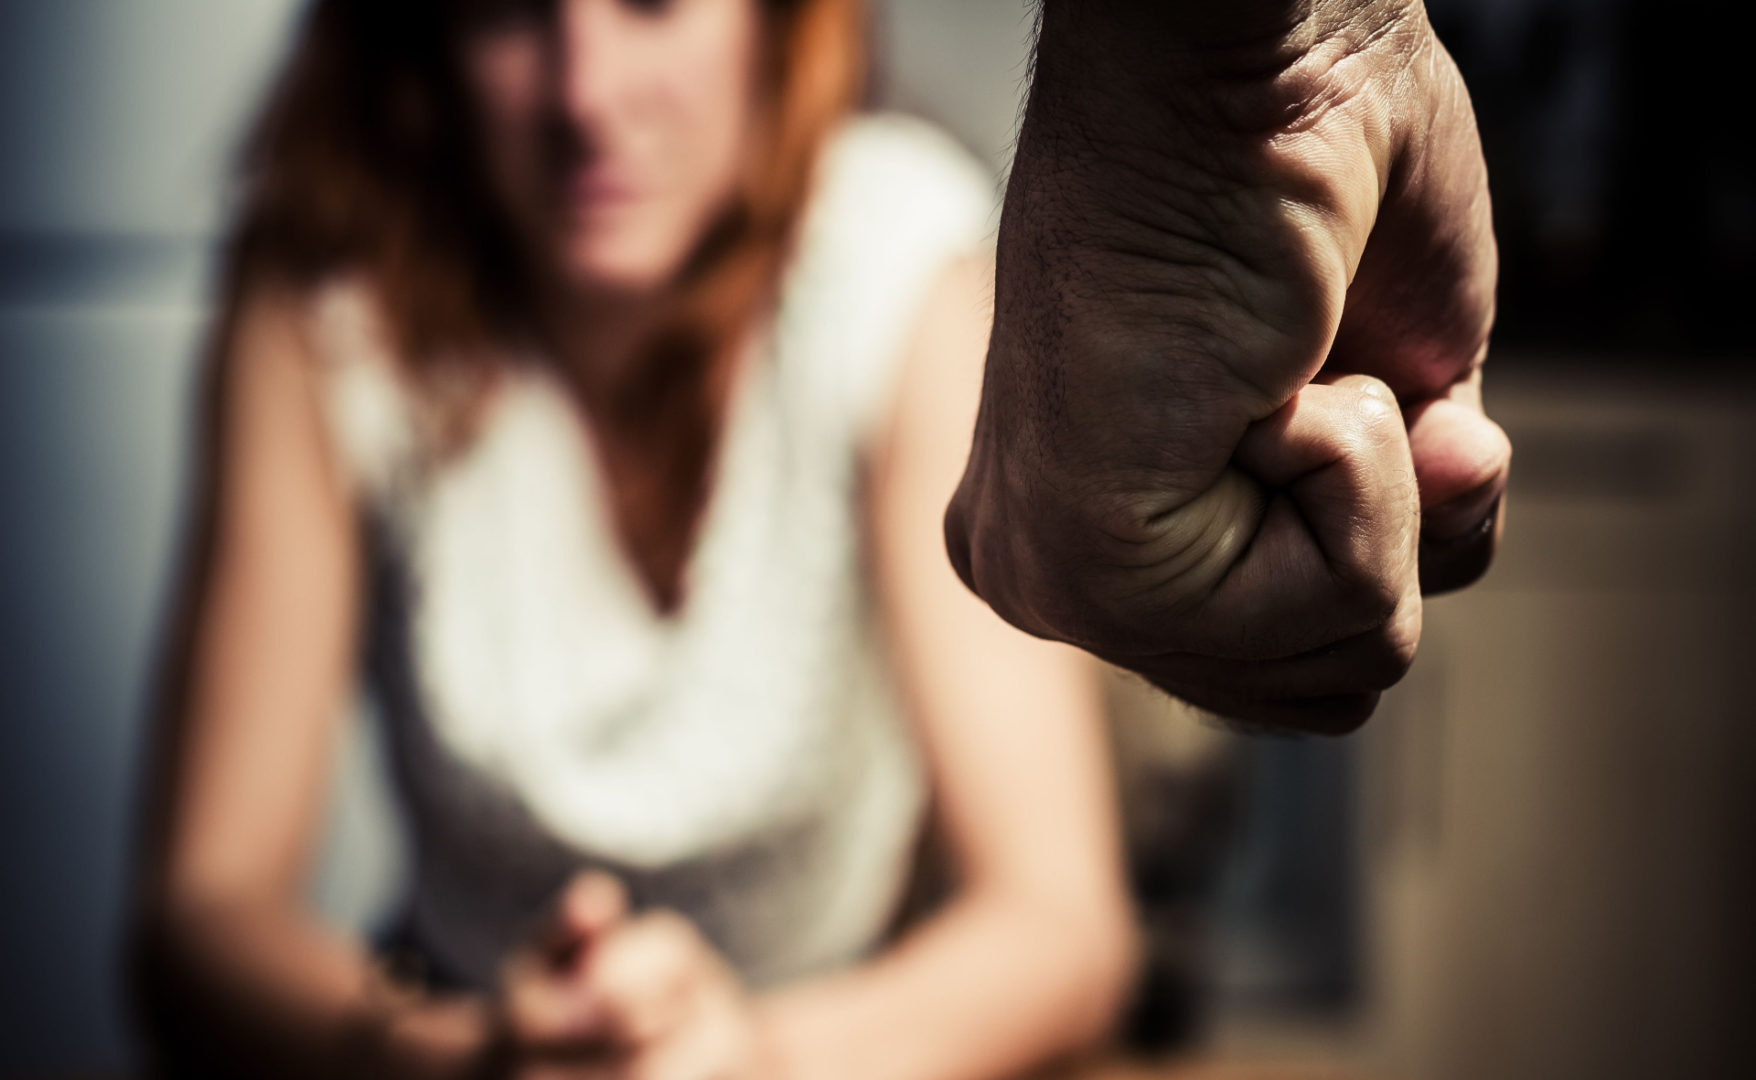 Divorcing Your Abusive Spouse